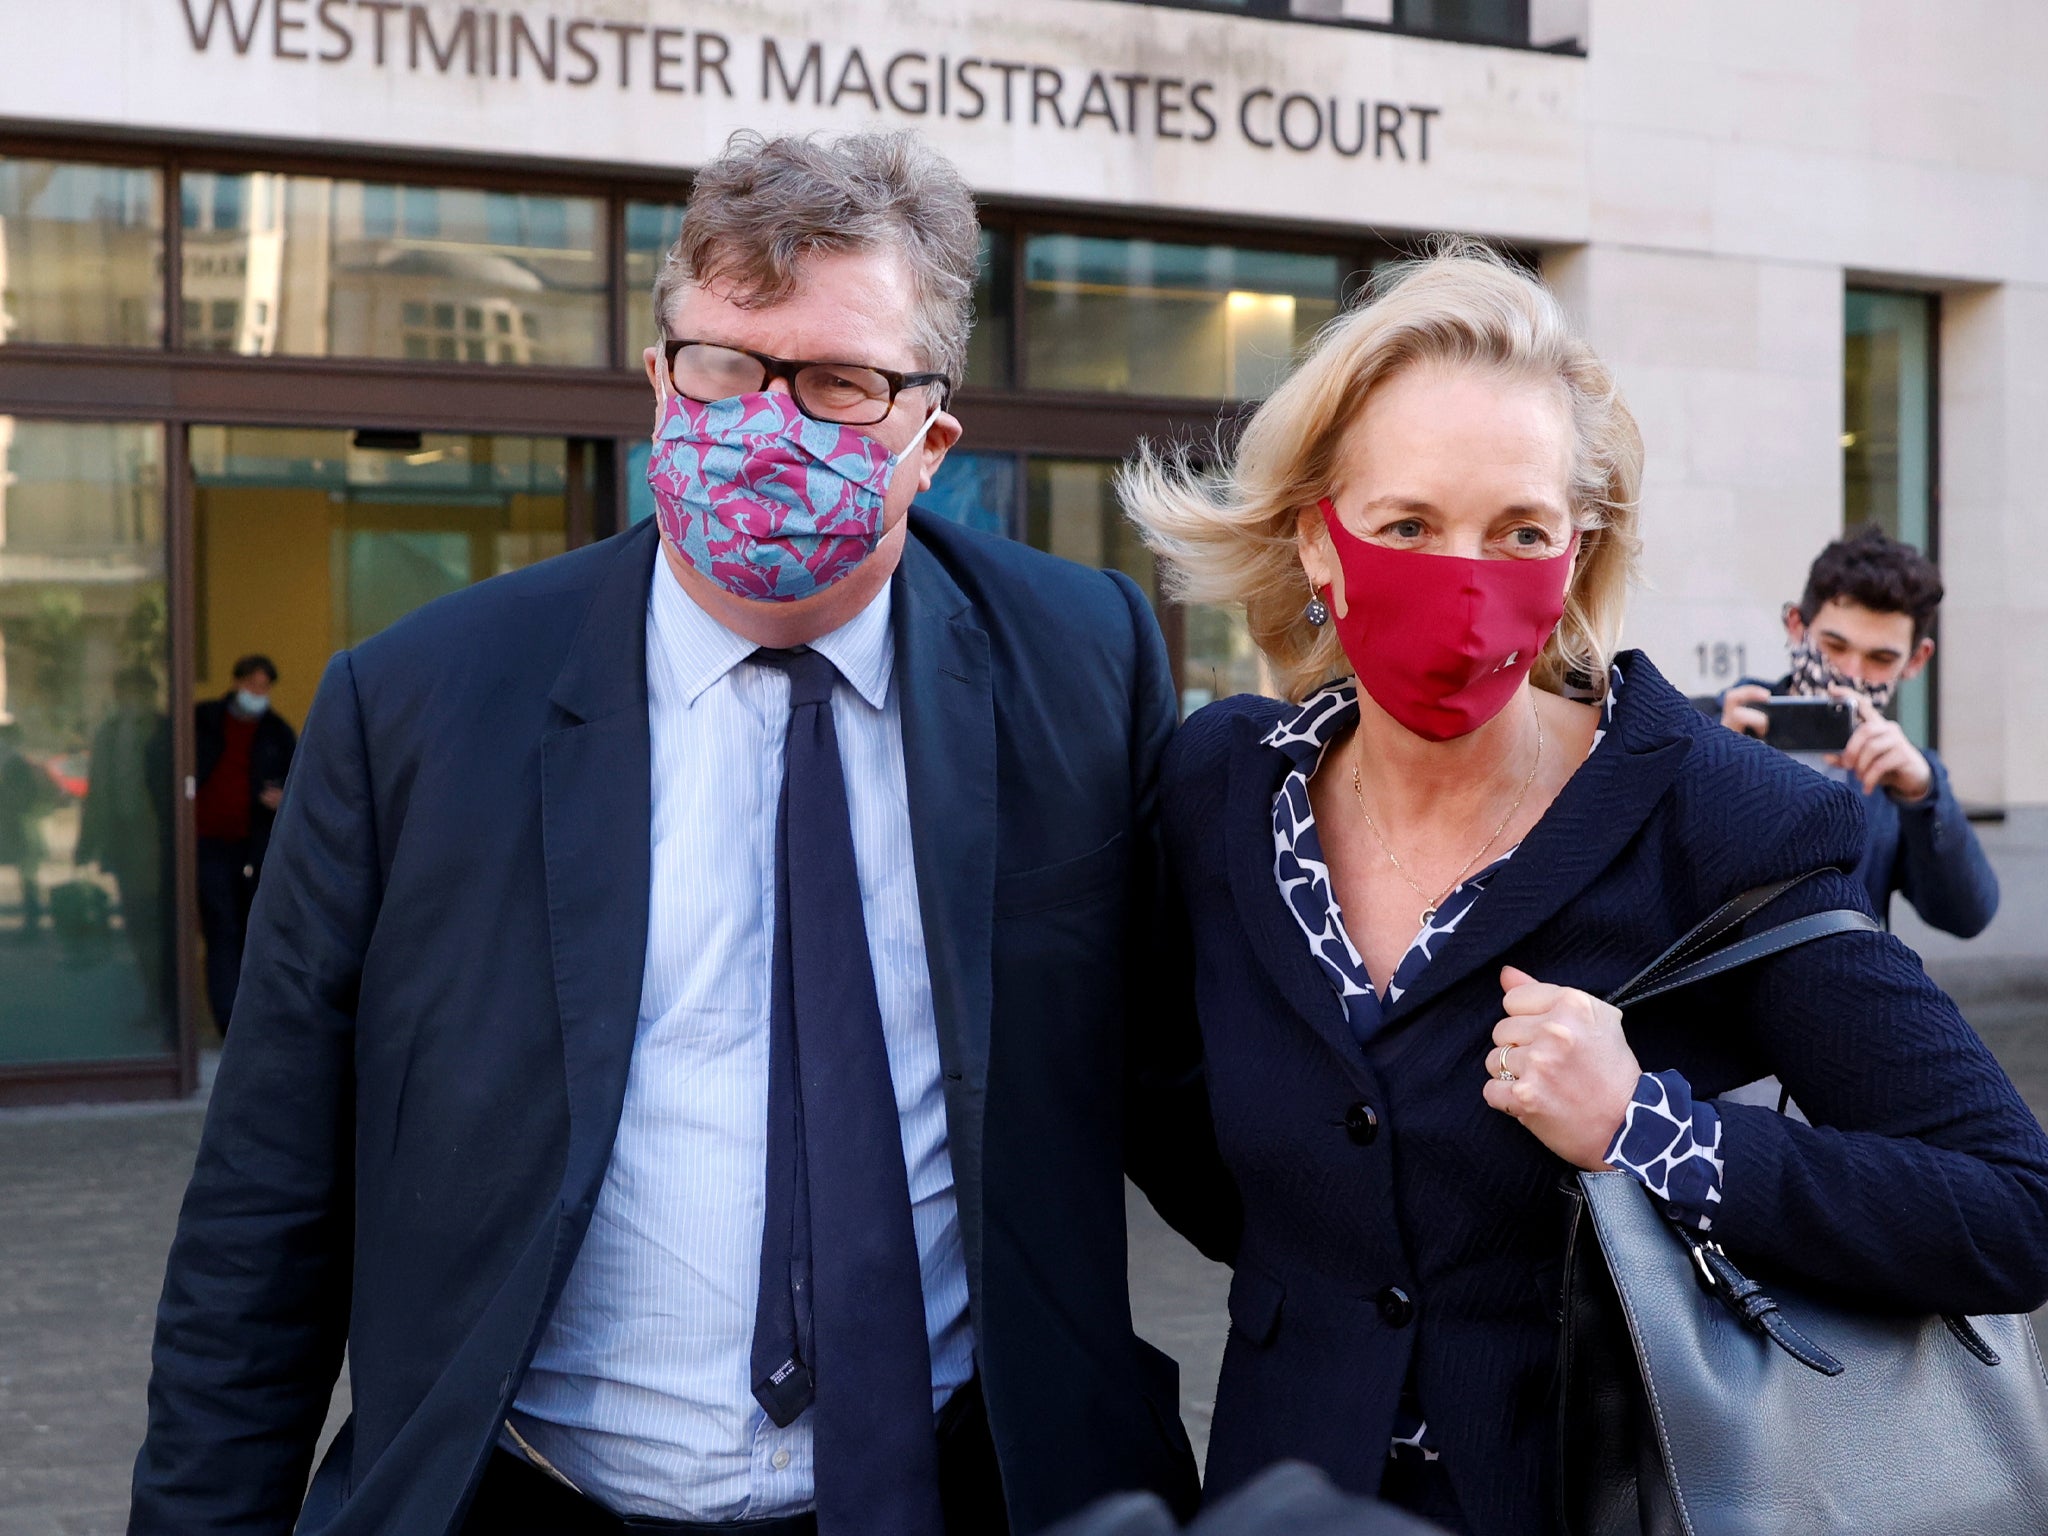 Hedge fund boss Crispin Odey was found not guilty of indecent assault after three-day trial in London